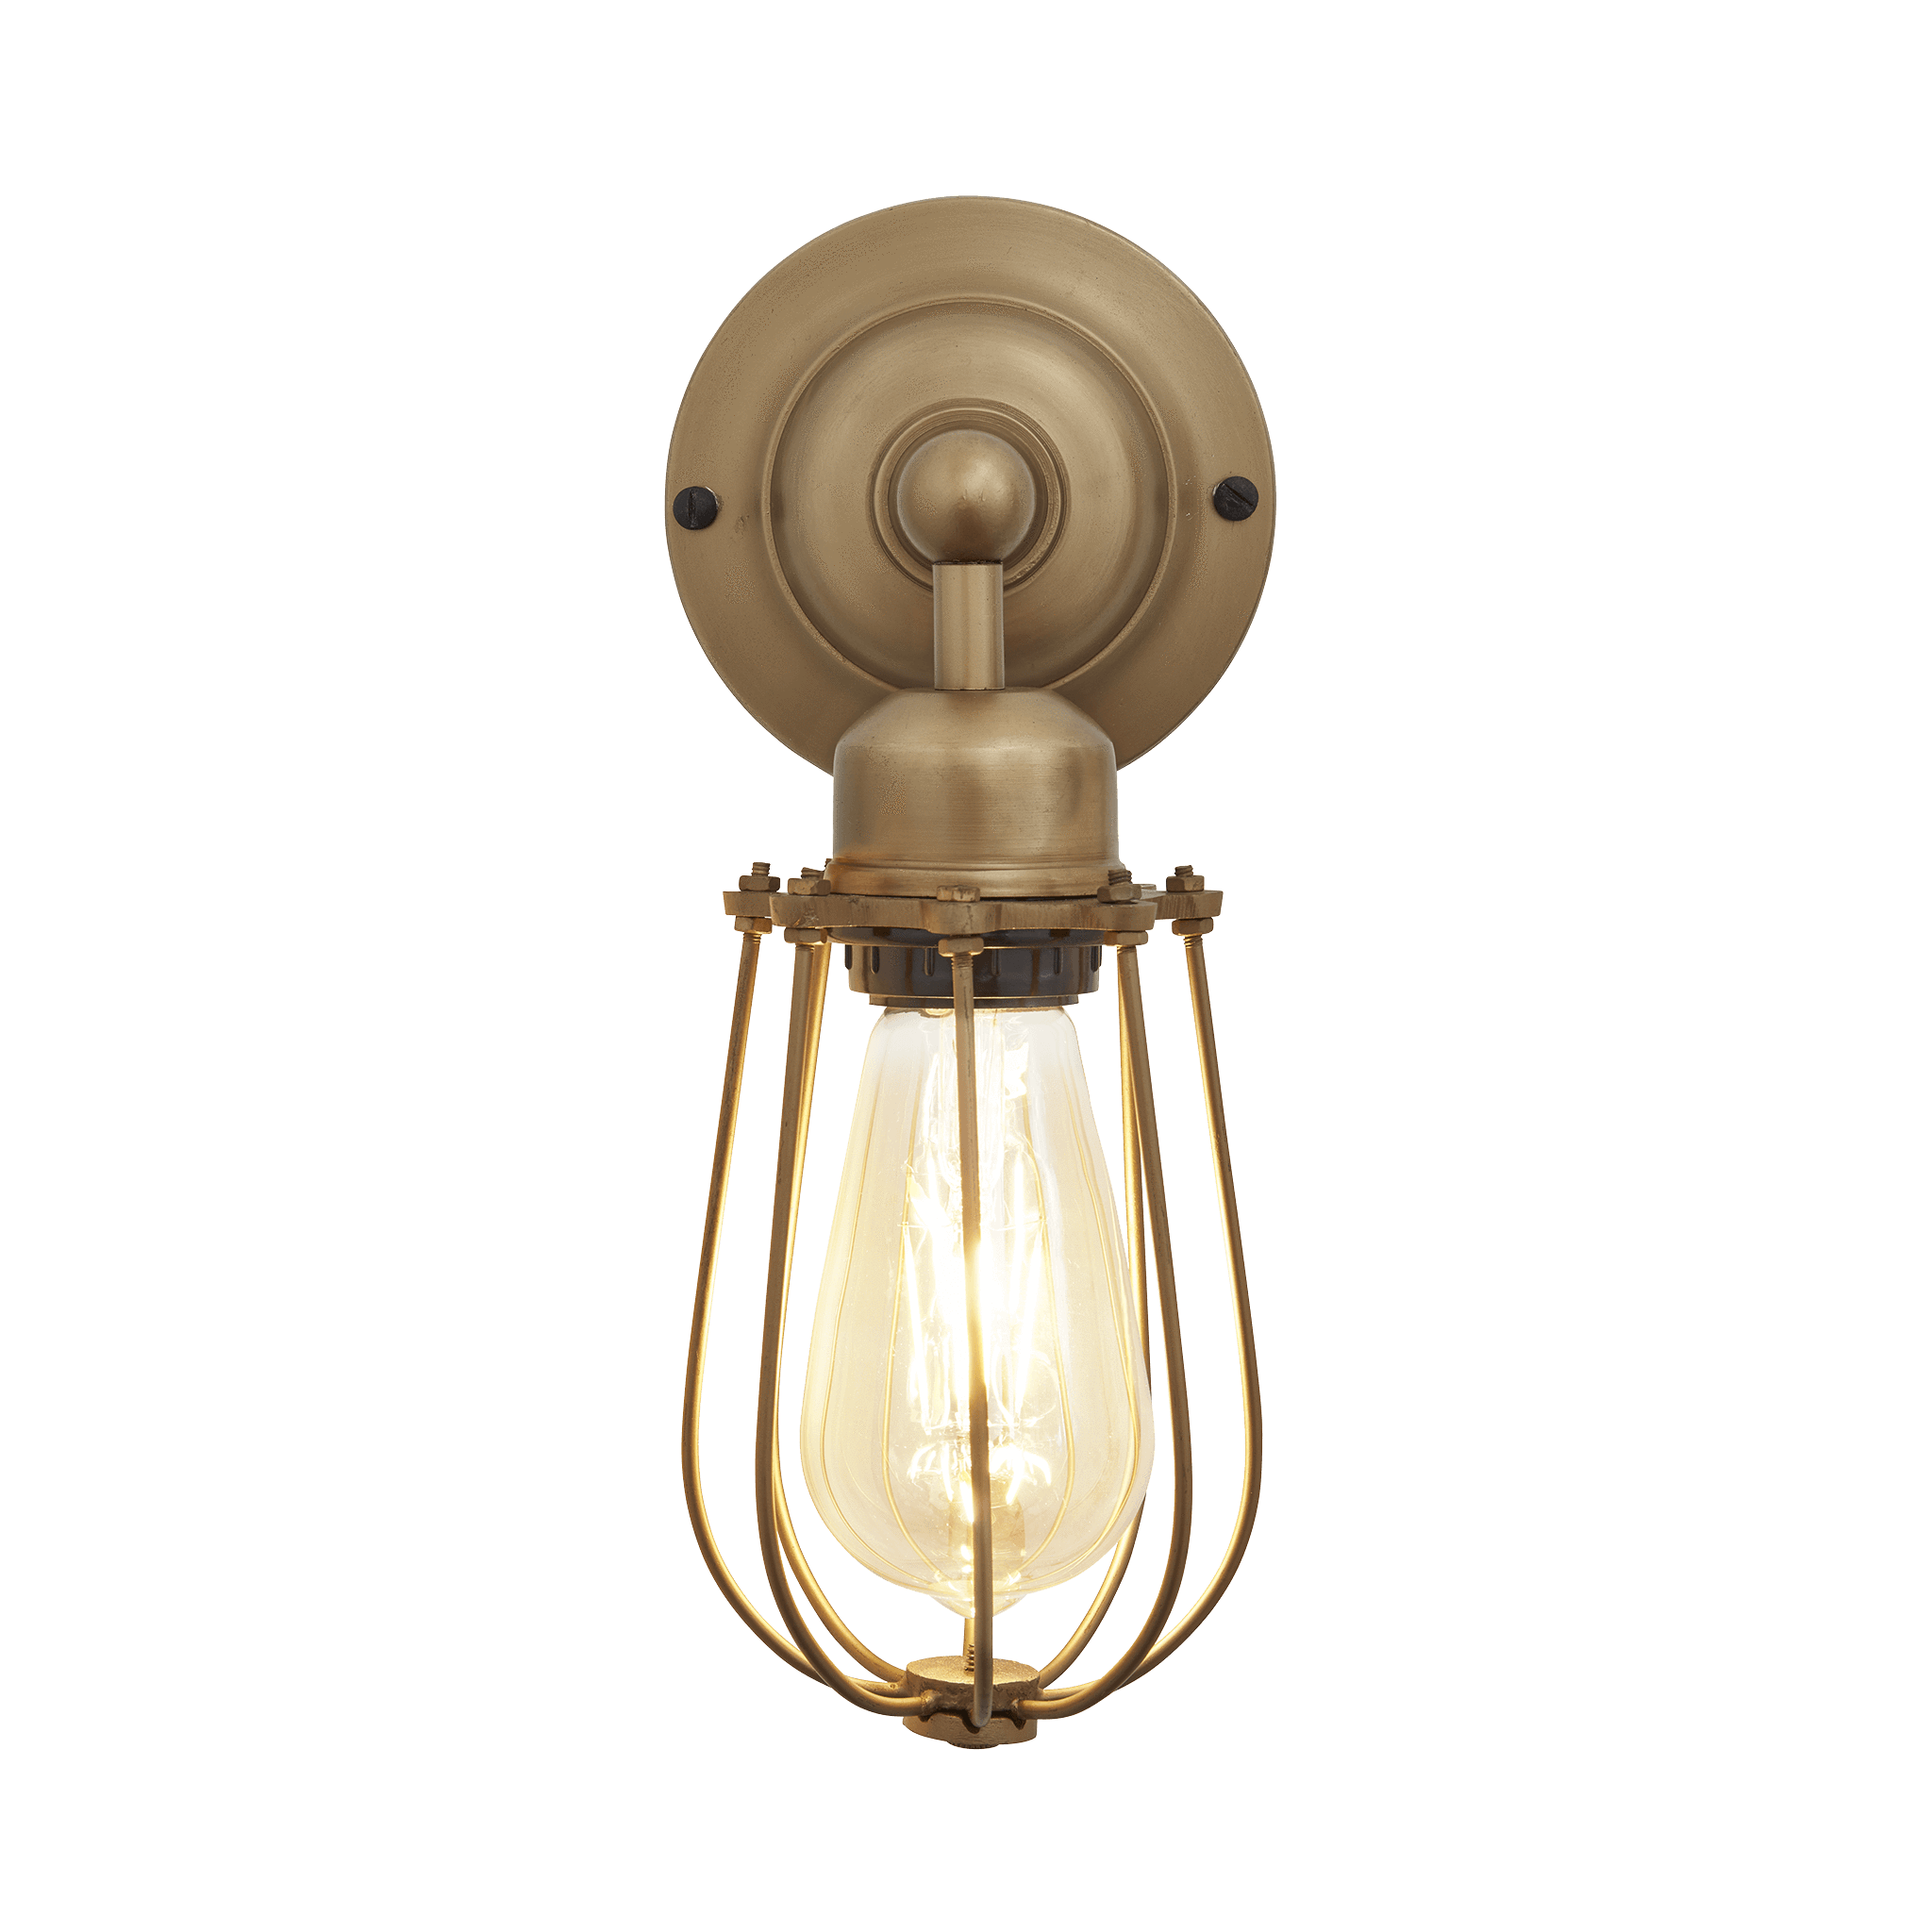 Industville – Orlando Wire Cage – 4 Inch – Wall Light Fixture – Brass Colour – Brass Material – 31 CM X 10 CM X 15 CM